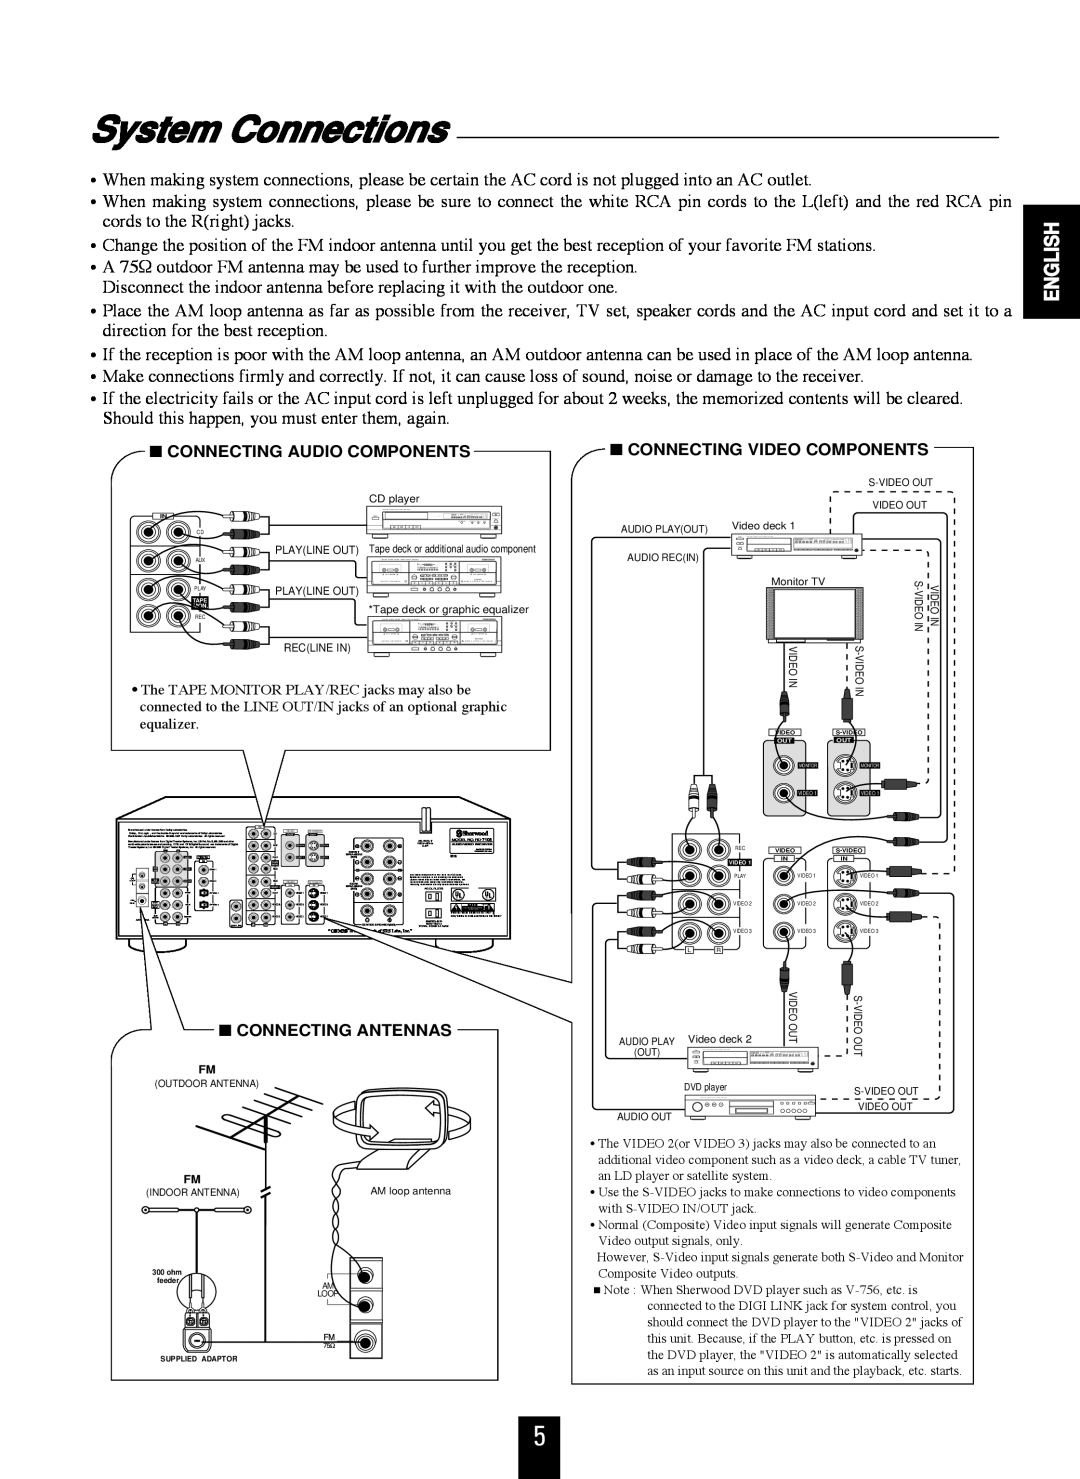 Sherwood RD-7106 manual System Connections, English, Connecting Audio Components, Connecting Video Components 